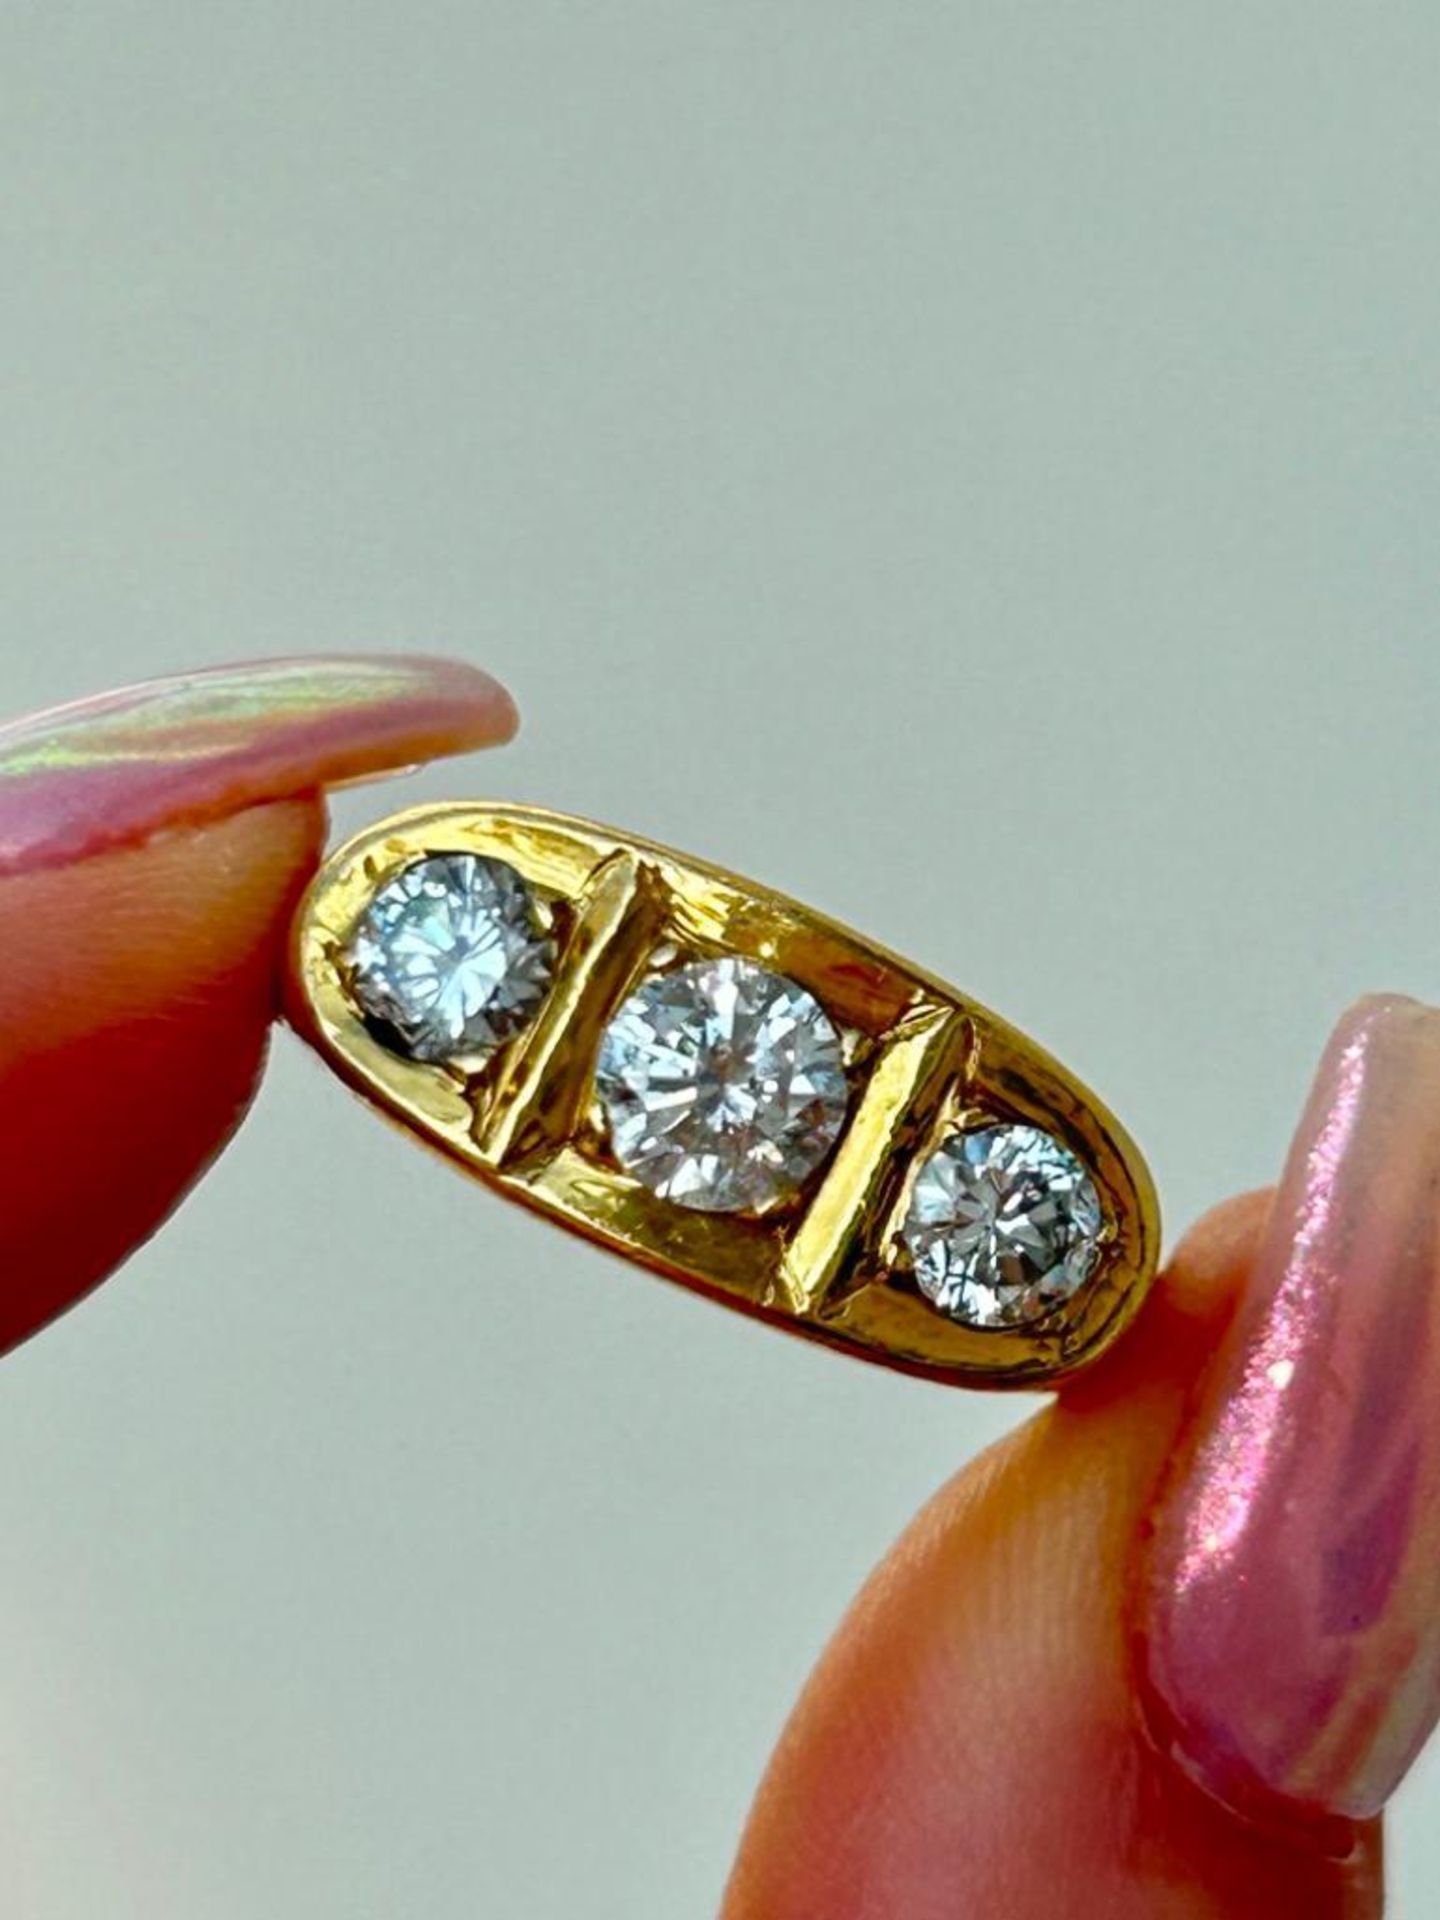 Giant Diamond 3 Stone Ring in 18ct Yellow Gold Approx 1 Carat 40 Total - Image 3 of 6